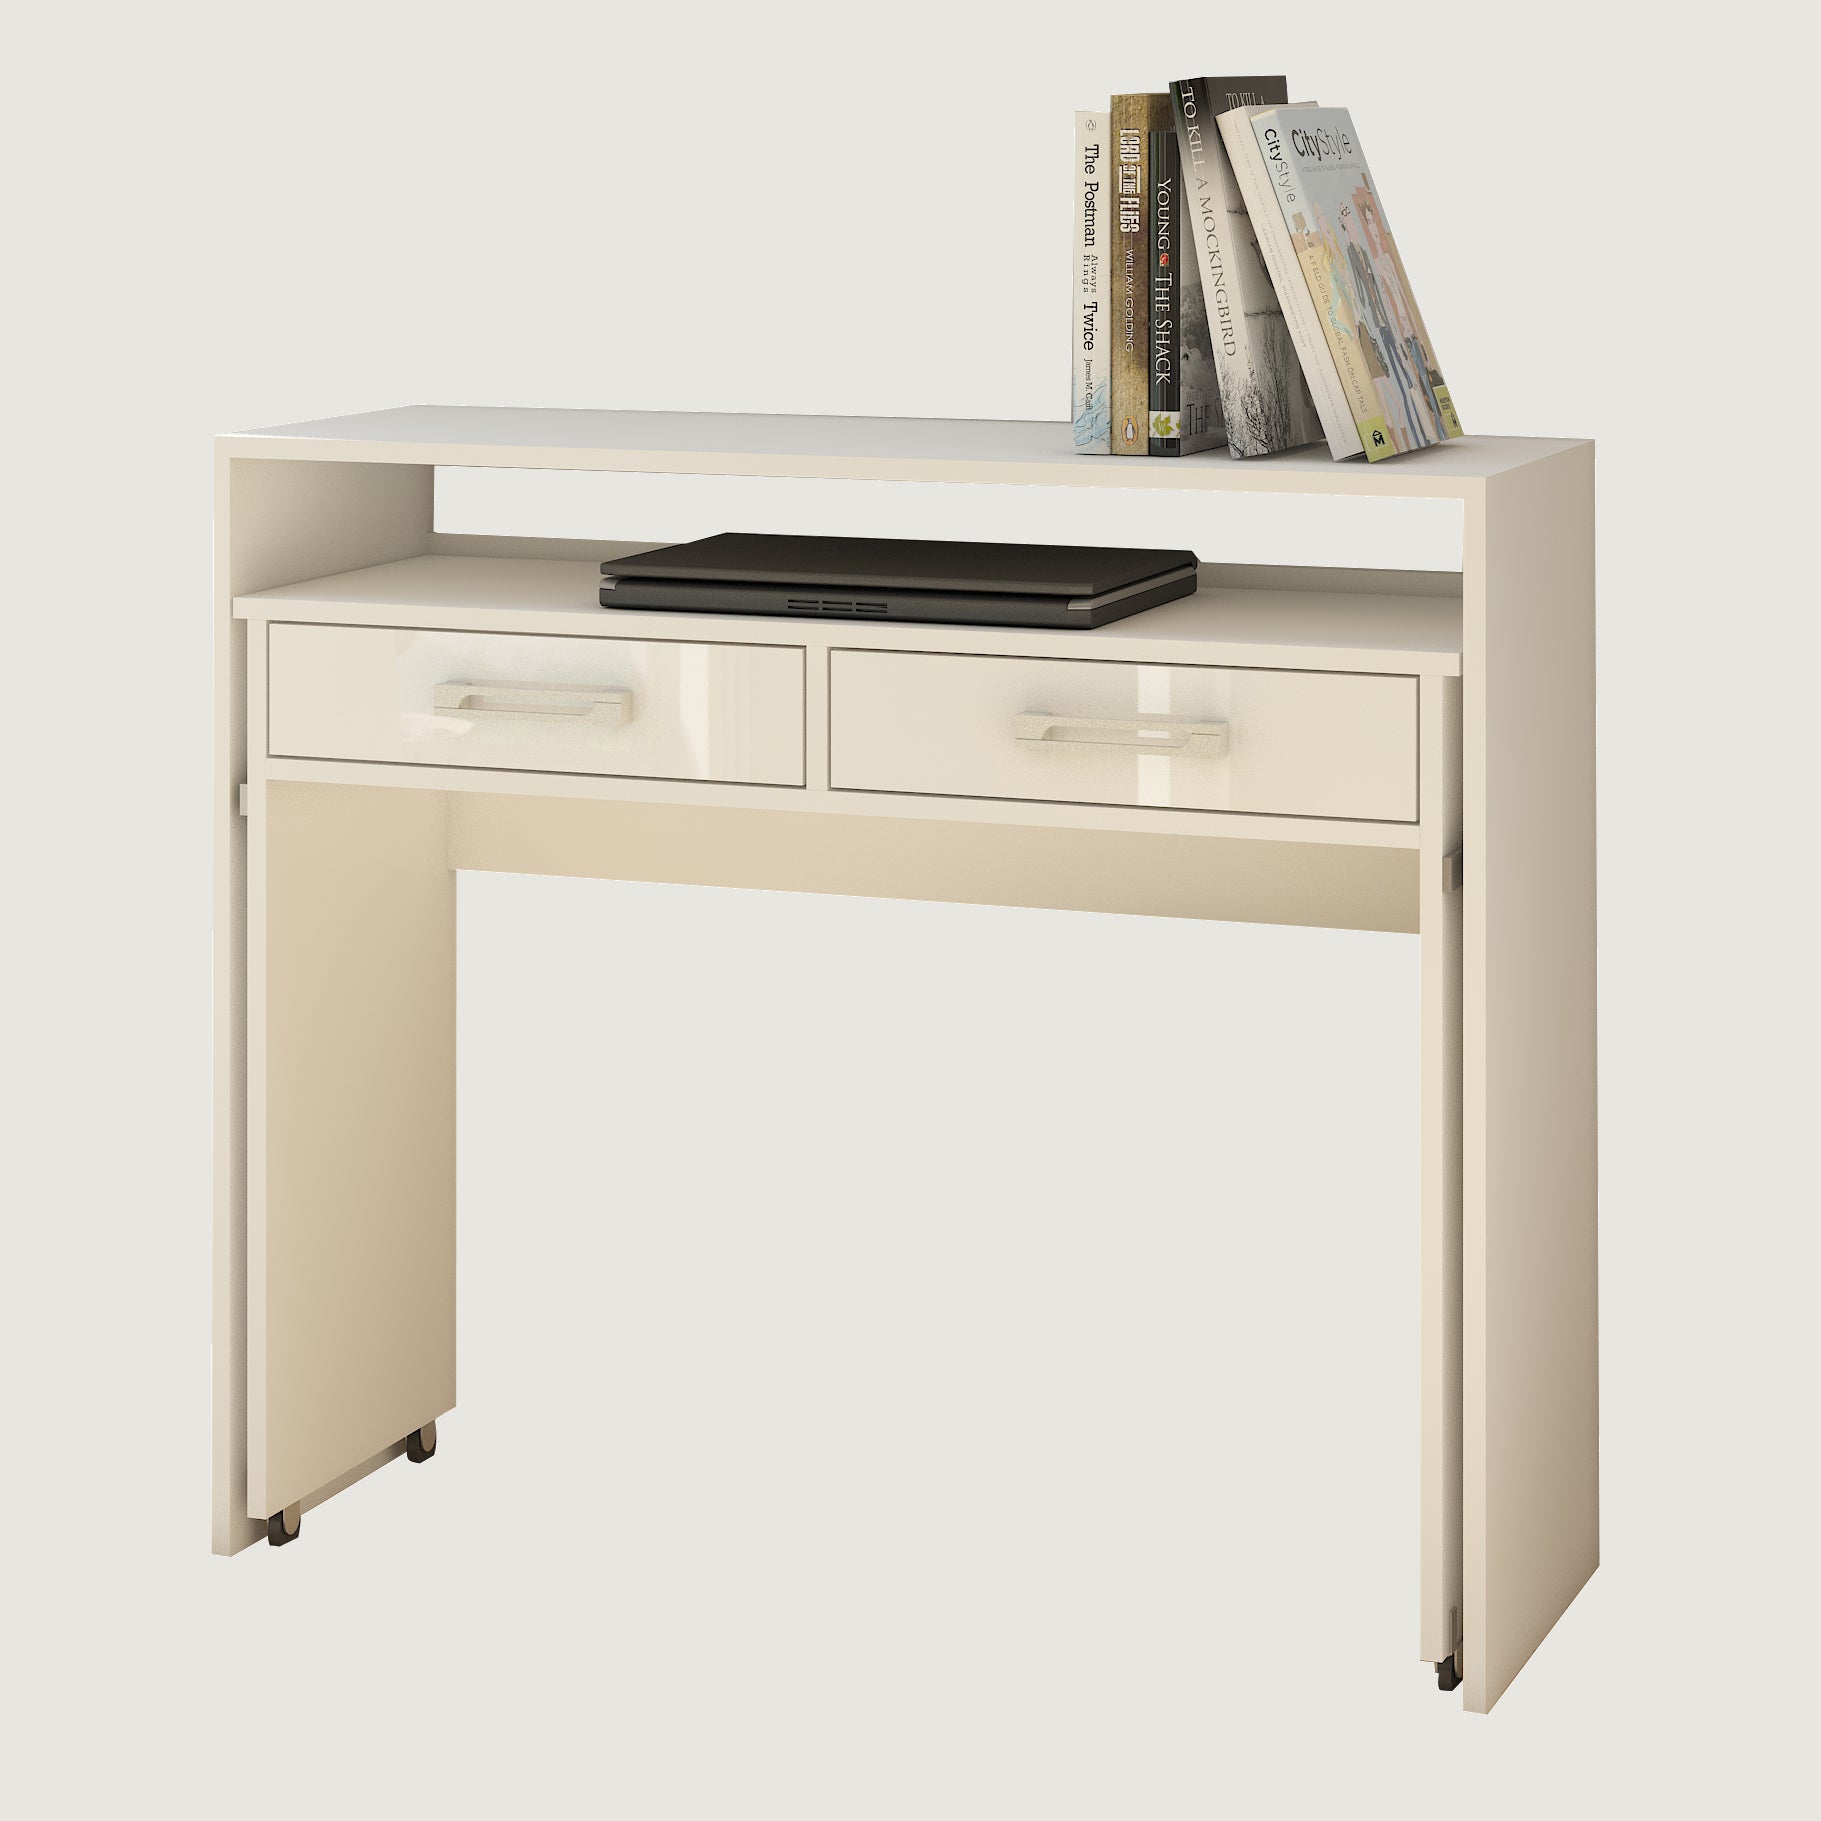 Zoom 2 Drawers Pull-Out Desk,  Multiple Finishes - Furniture.Agency